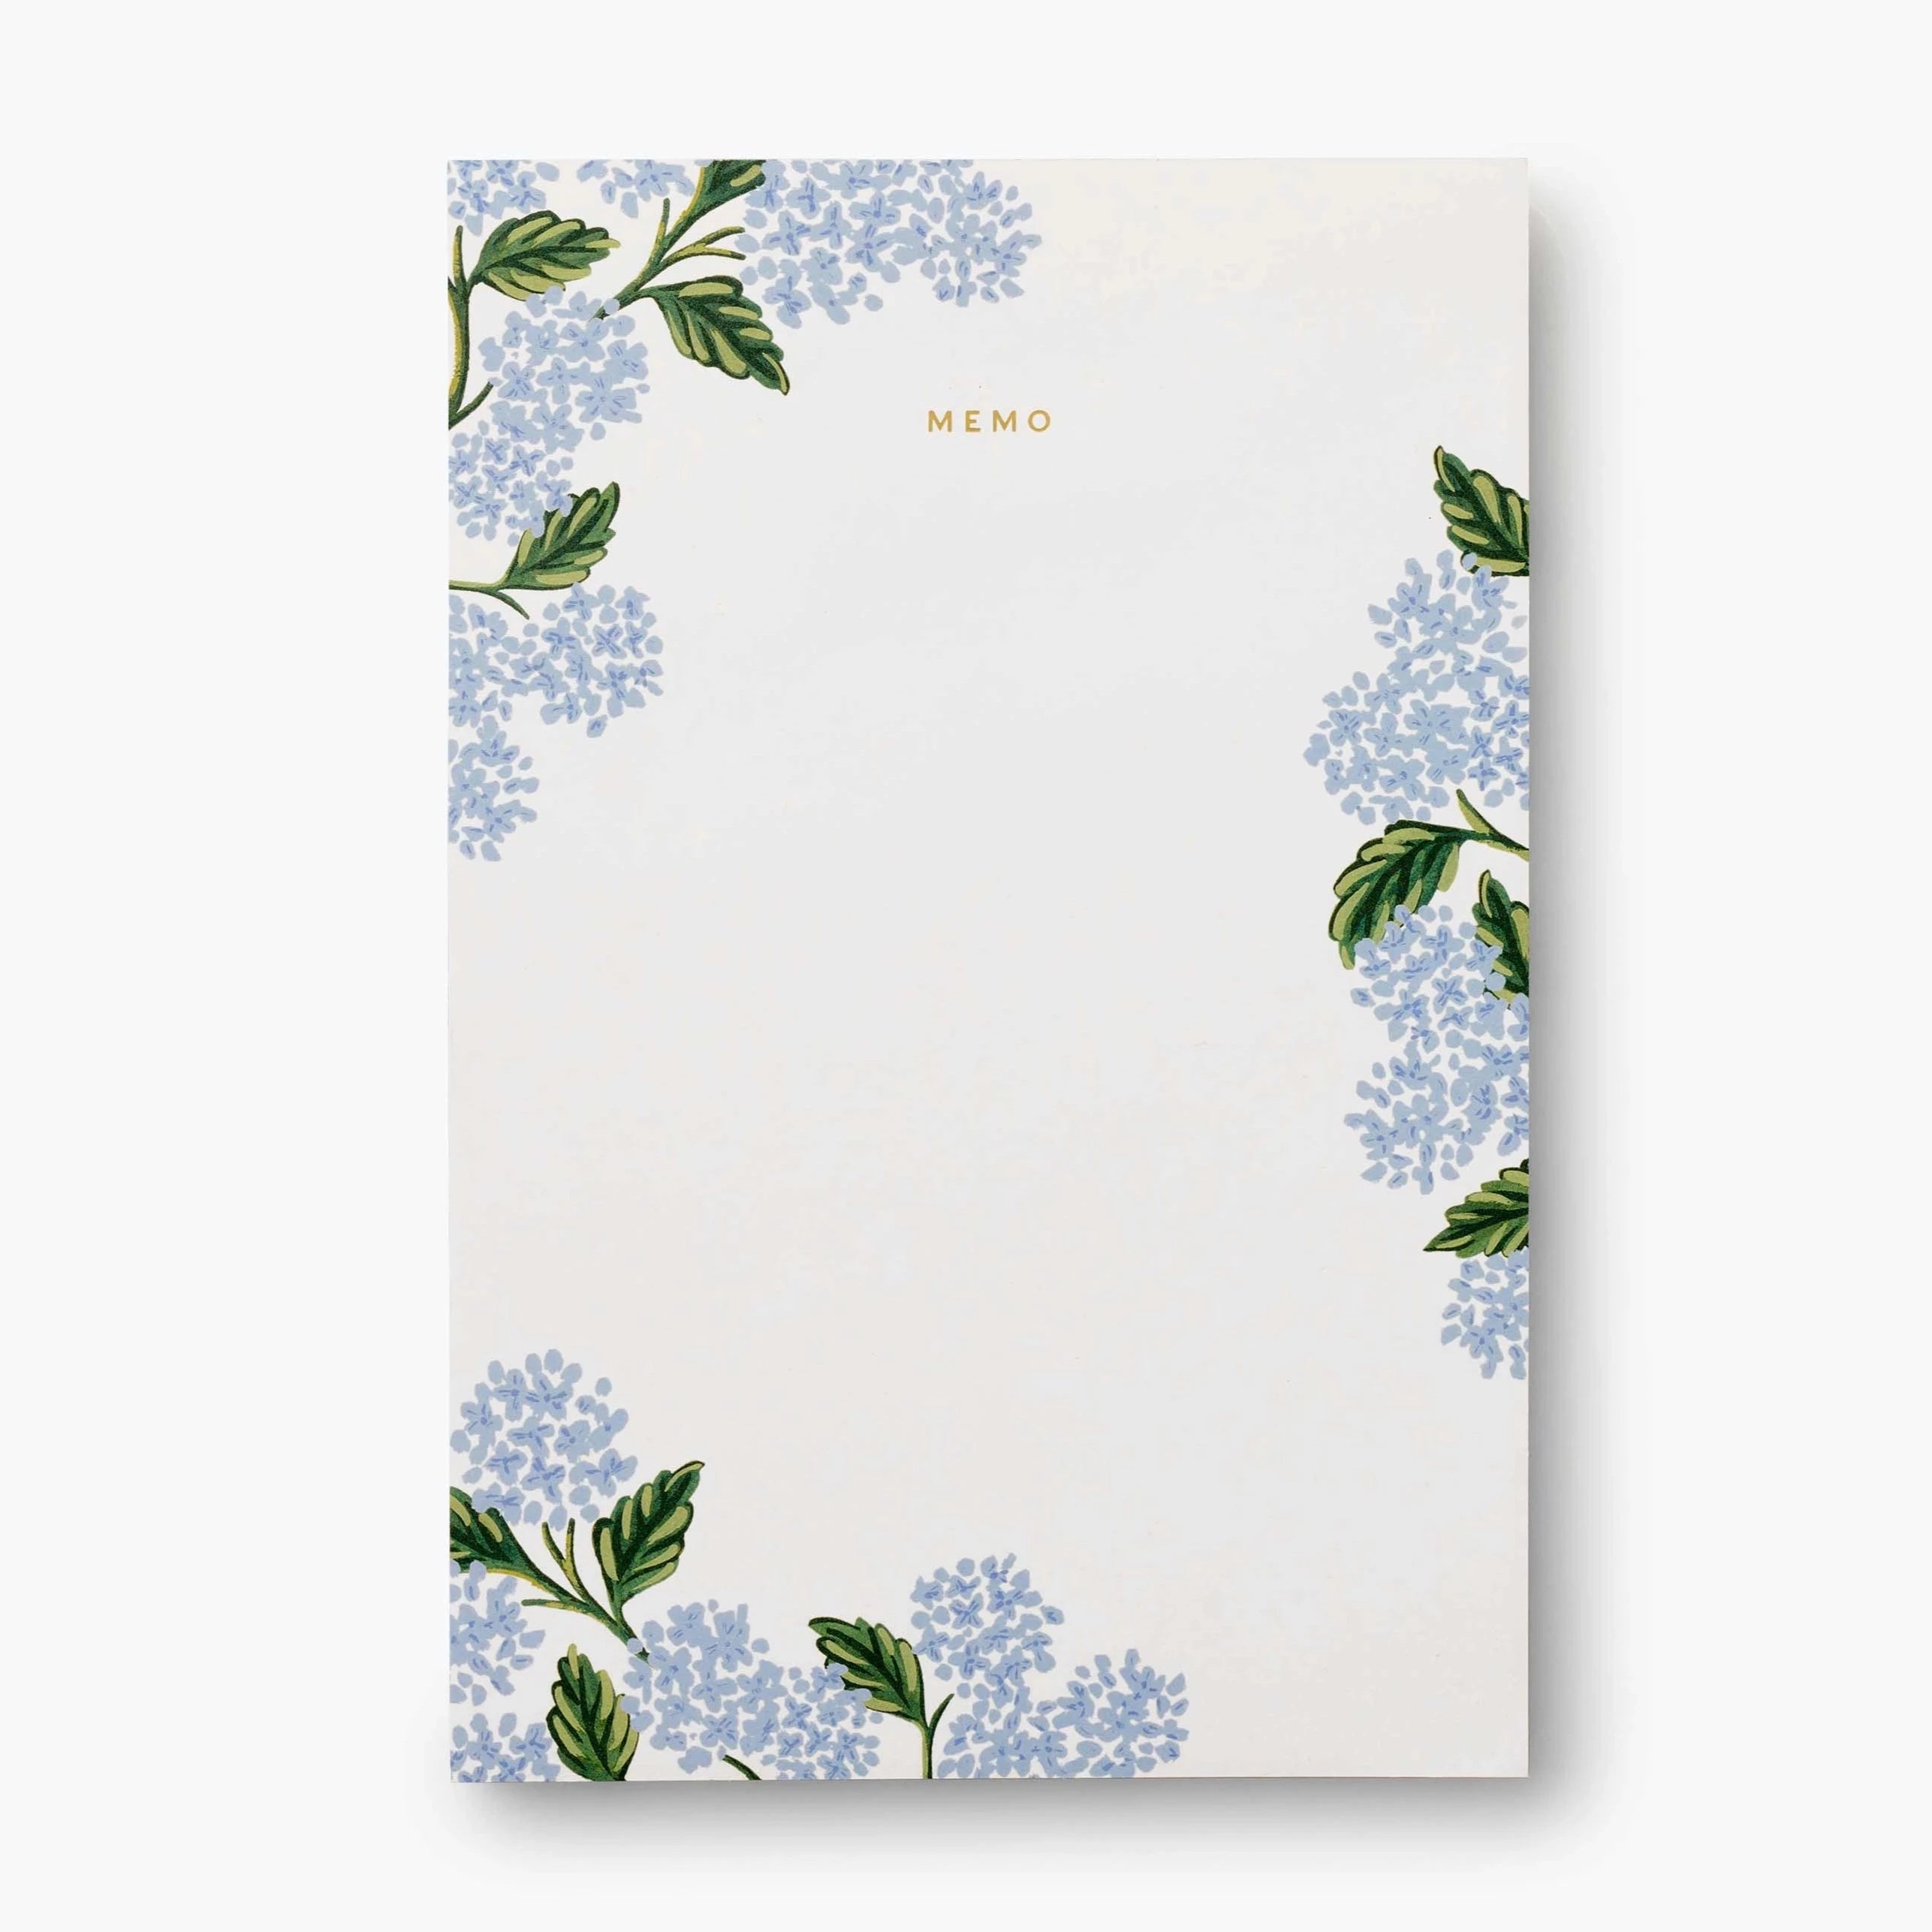 Large white memo pad with "memo" in gold foil at the top. Blue hydrangeas decorating the borders of the notepad. 